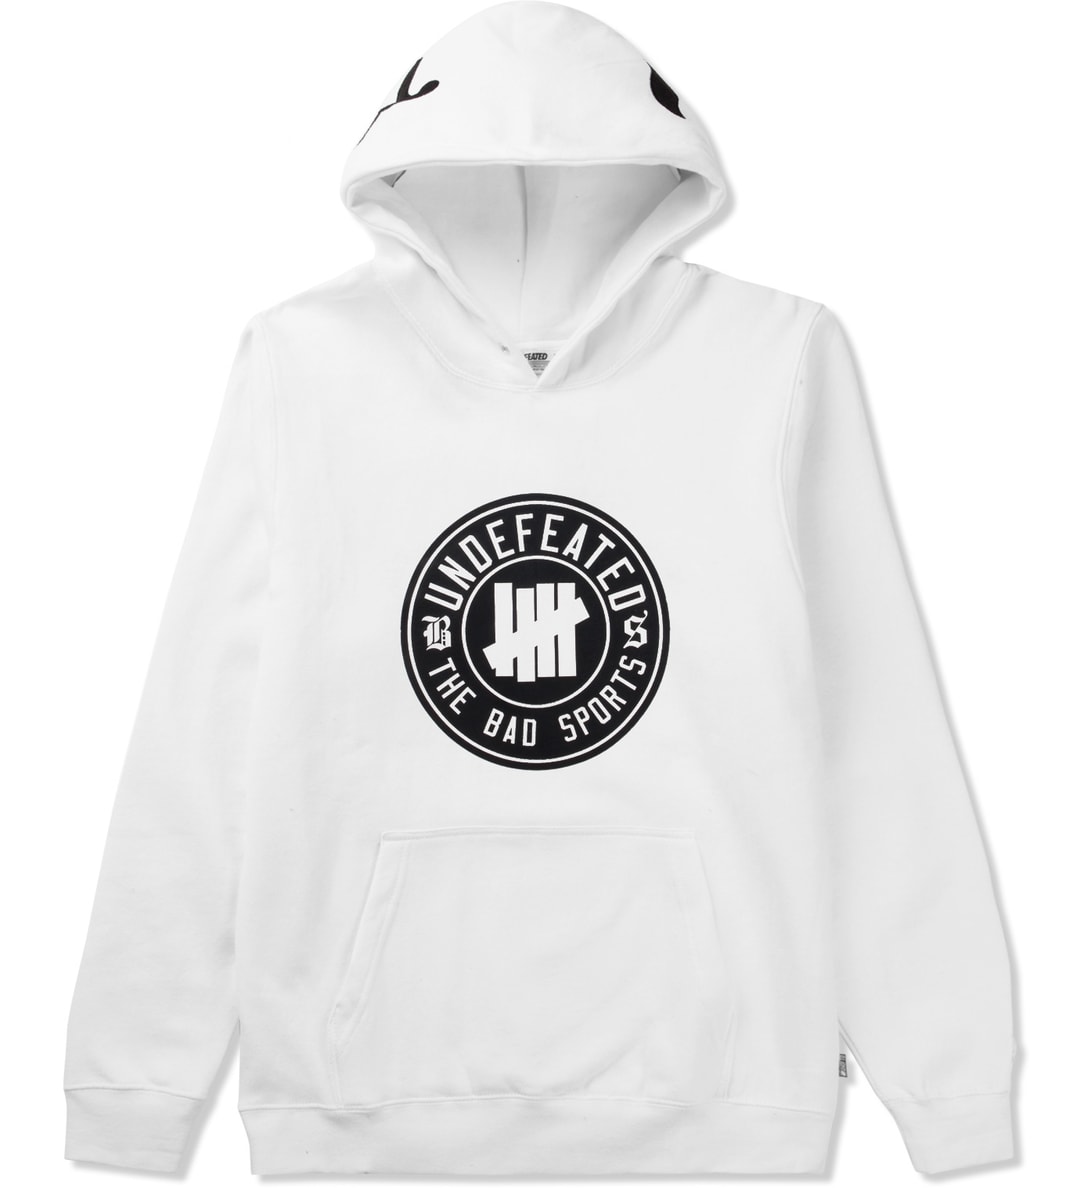 Undefeated - White BS Hoodie | HBX - Globally Curated Fashion and ...